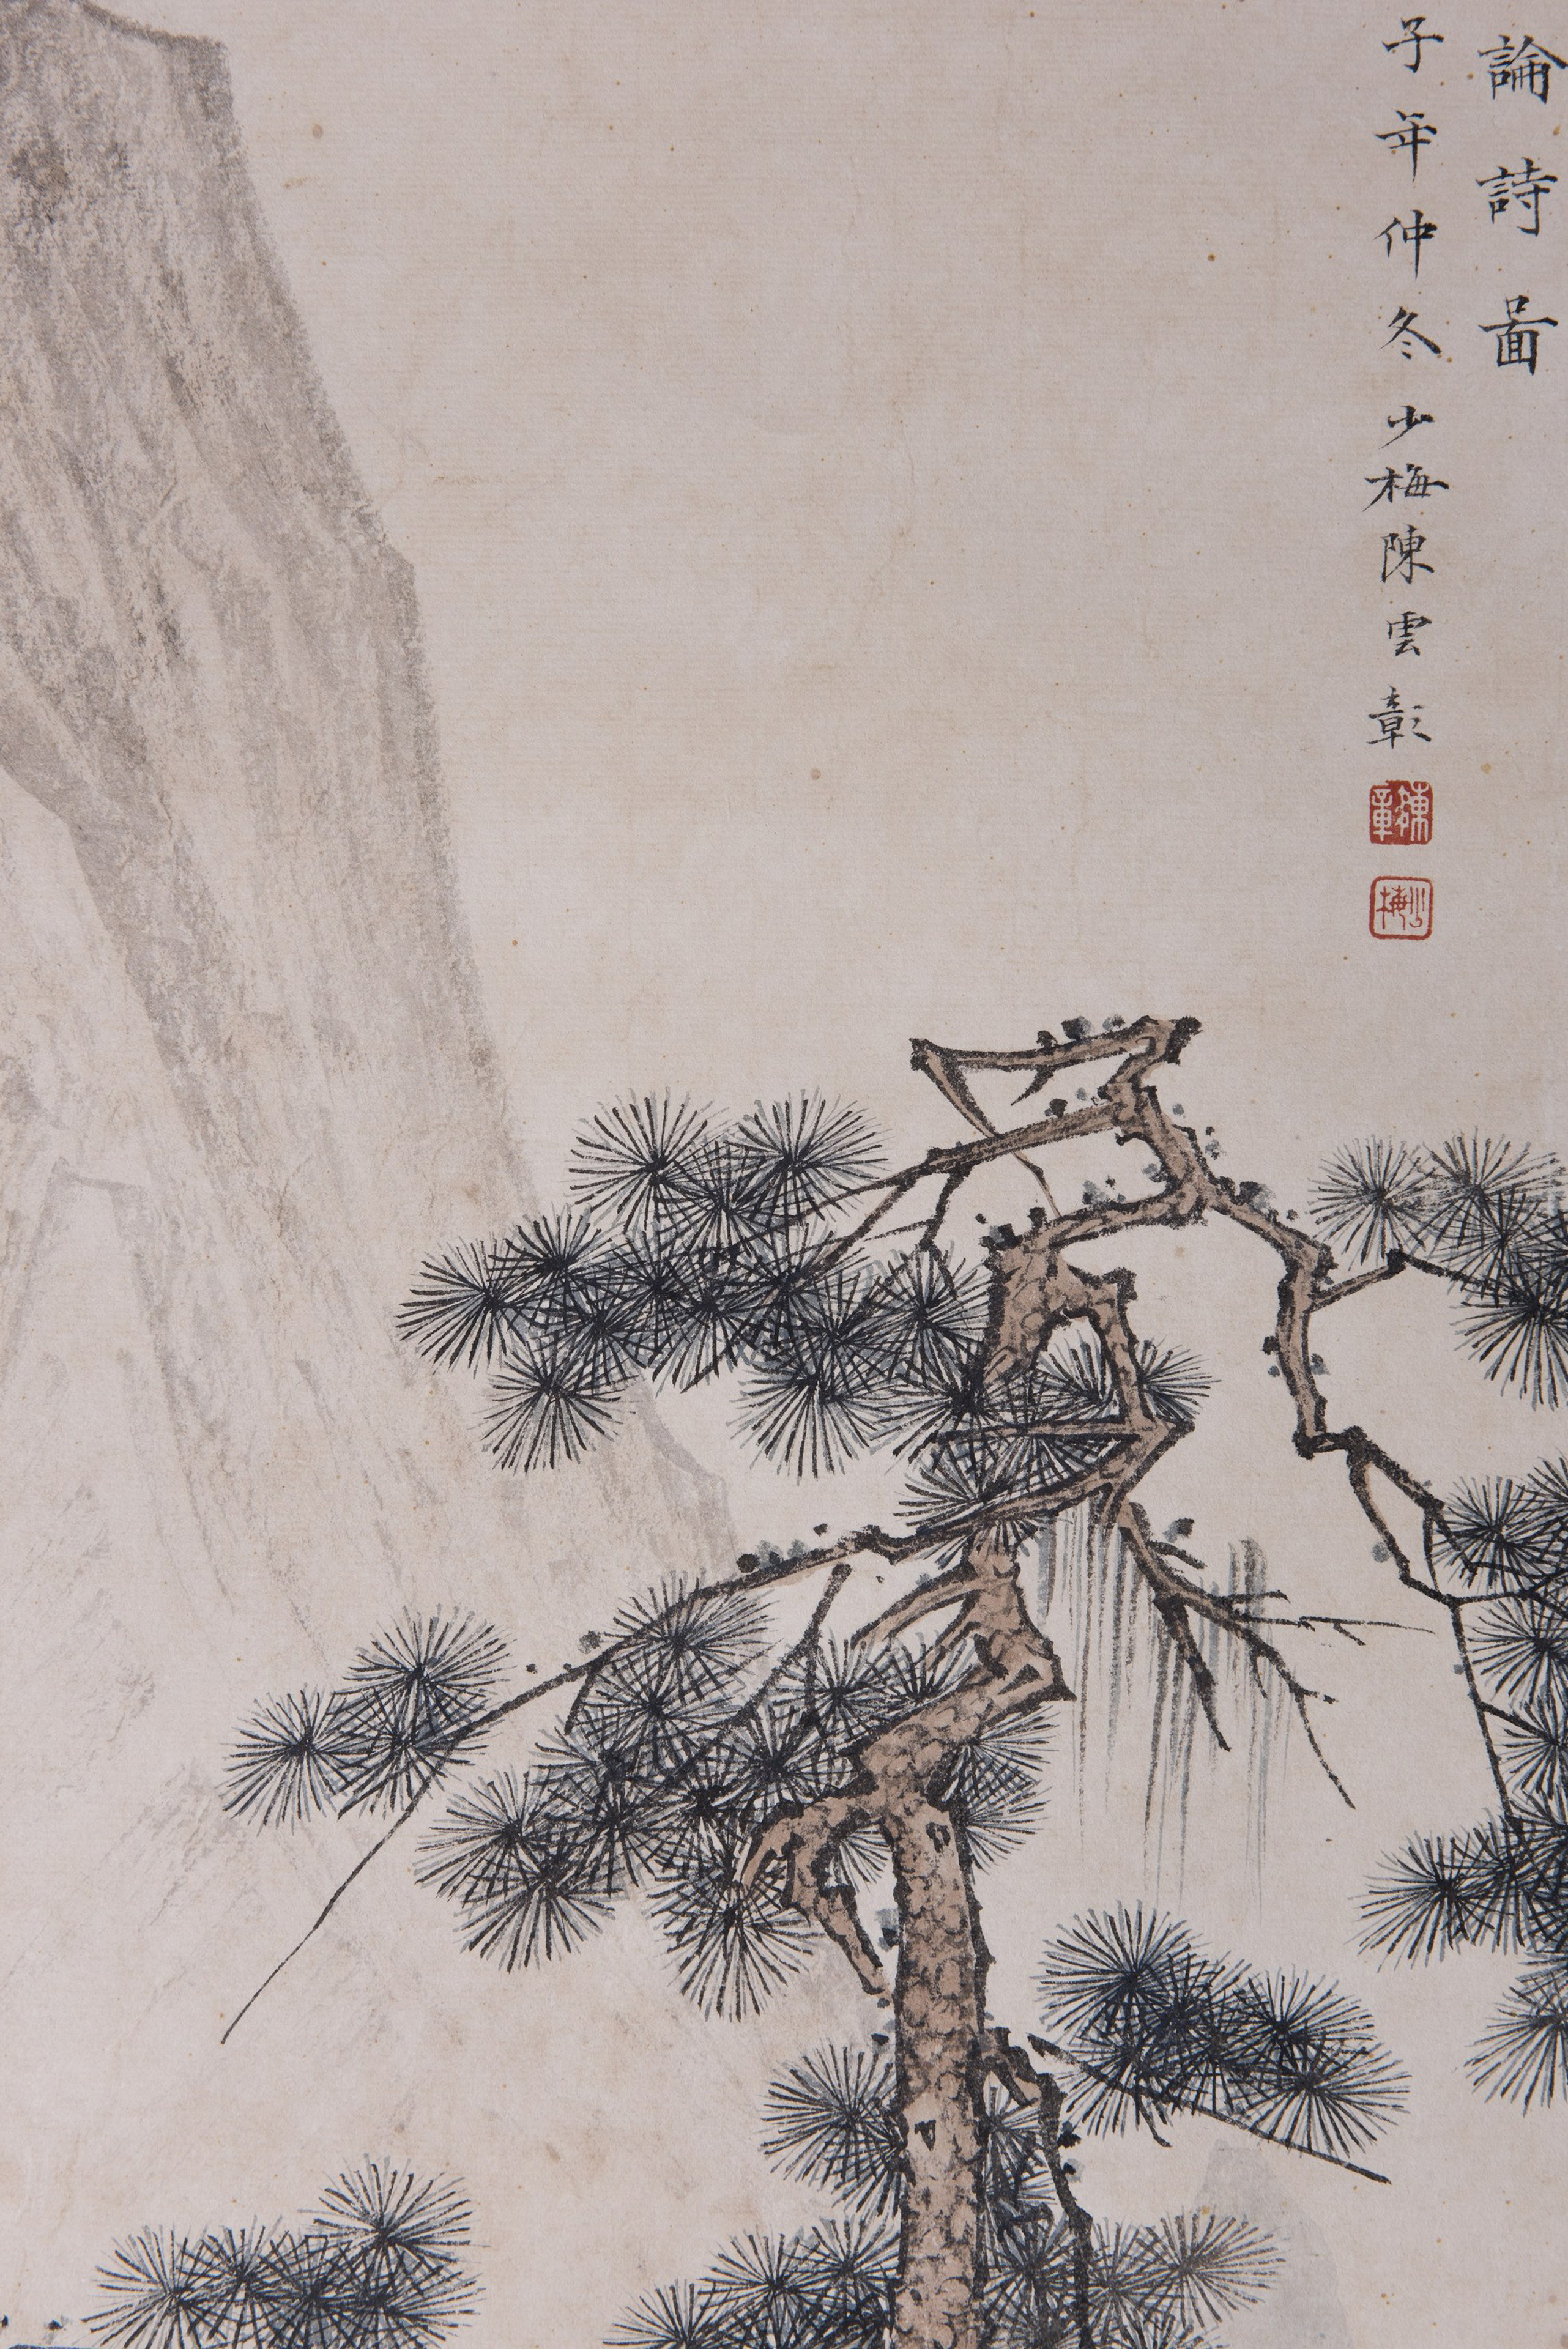 Chen Shao Mei (Attributed to, 1909-1954), Pine Tree - Image 3 of 3